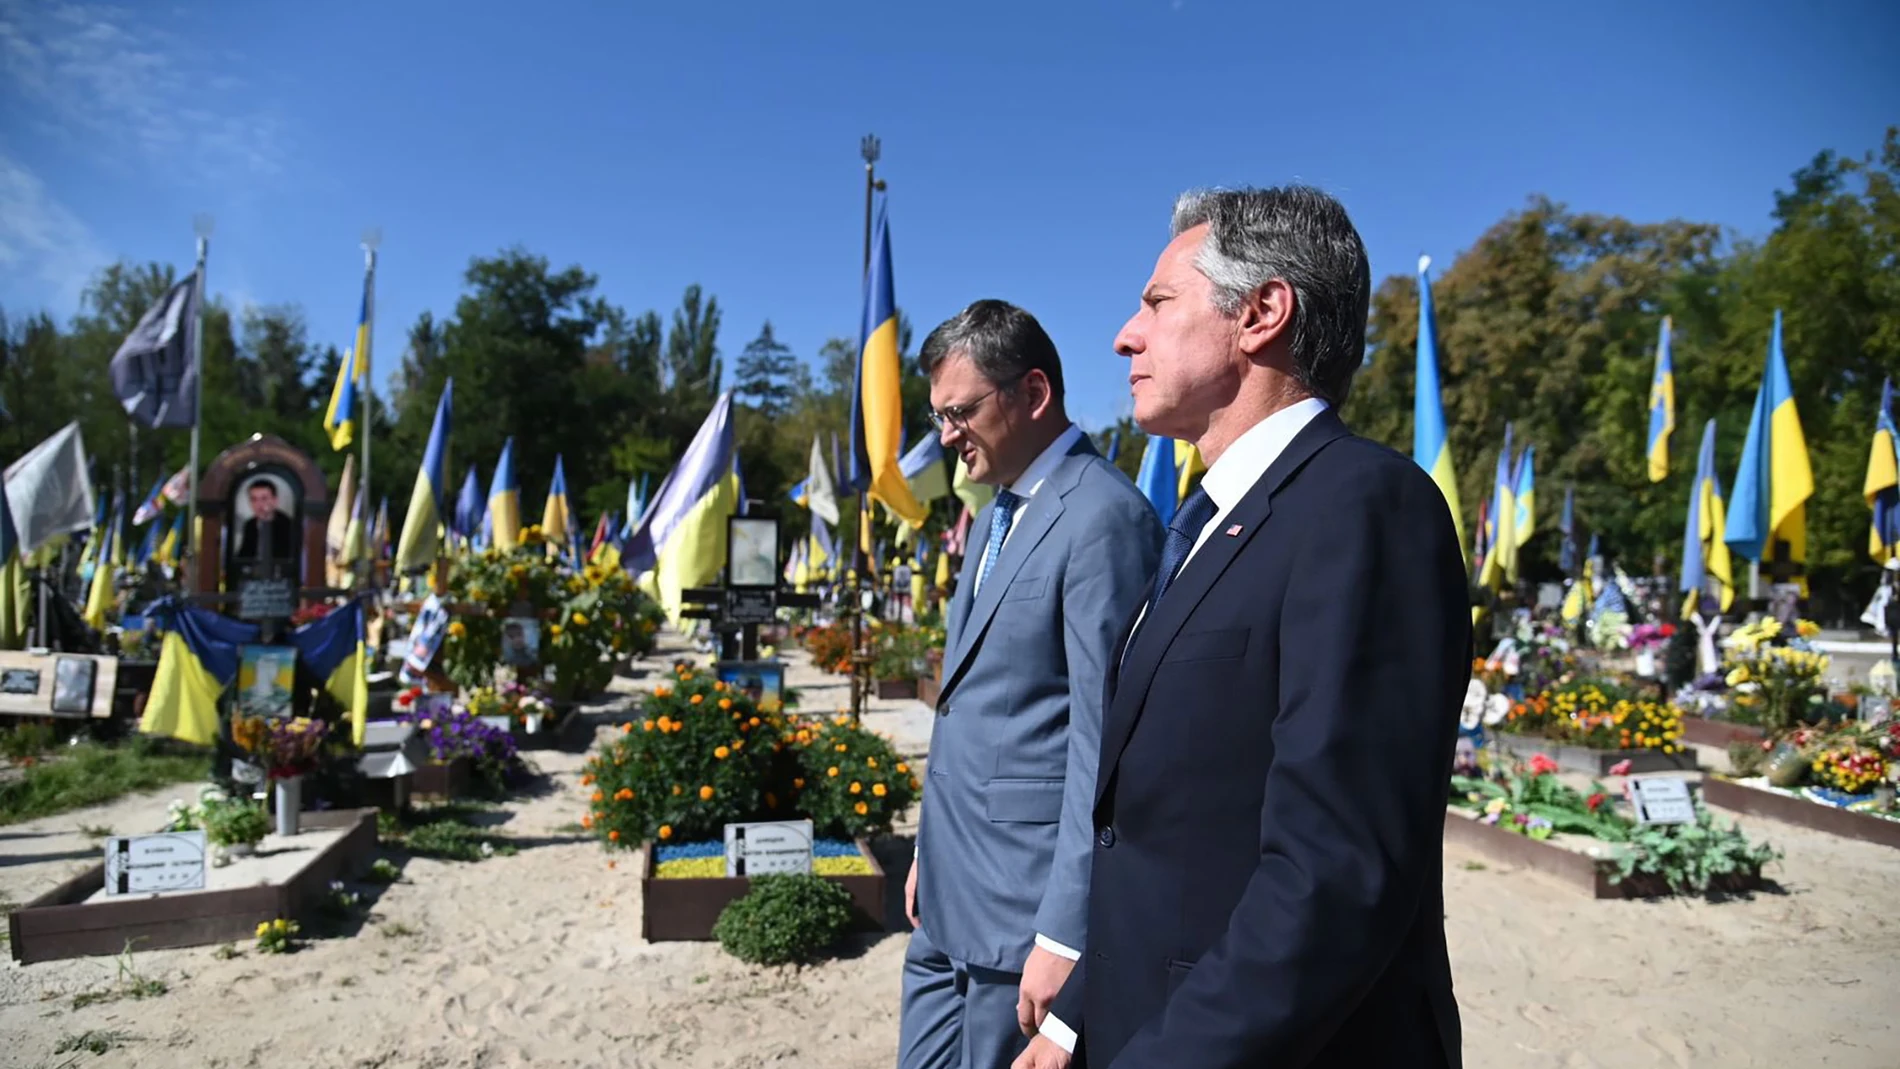 Kyiv (Ukraine), 06/09/2023.- A handout photo made available by the Press Service of the Ministry of Foreign Affairs of Ukraine shows US Secretary of State Antony Blinken (R) and Ukraine's Minister of Foreign Affairs of Dmytro Kuleba (L) visiting the Berkovetske cemetery in Kyiv (Kiev), Ukraine, 06 September 2023, where he paid his respects to Ukrainian fallen soldiers amid the Russian invasion. Blinken arrived in Ukraine's capital for an unannounced visit where he will meet with top Ukrainian...